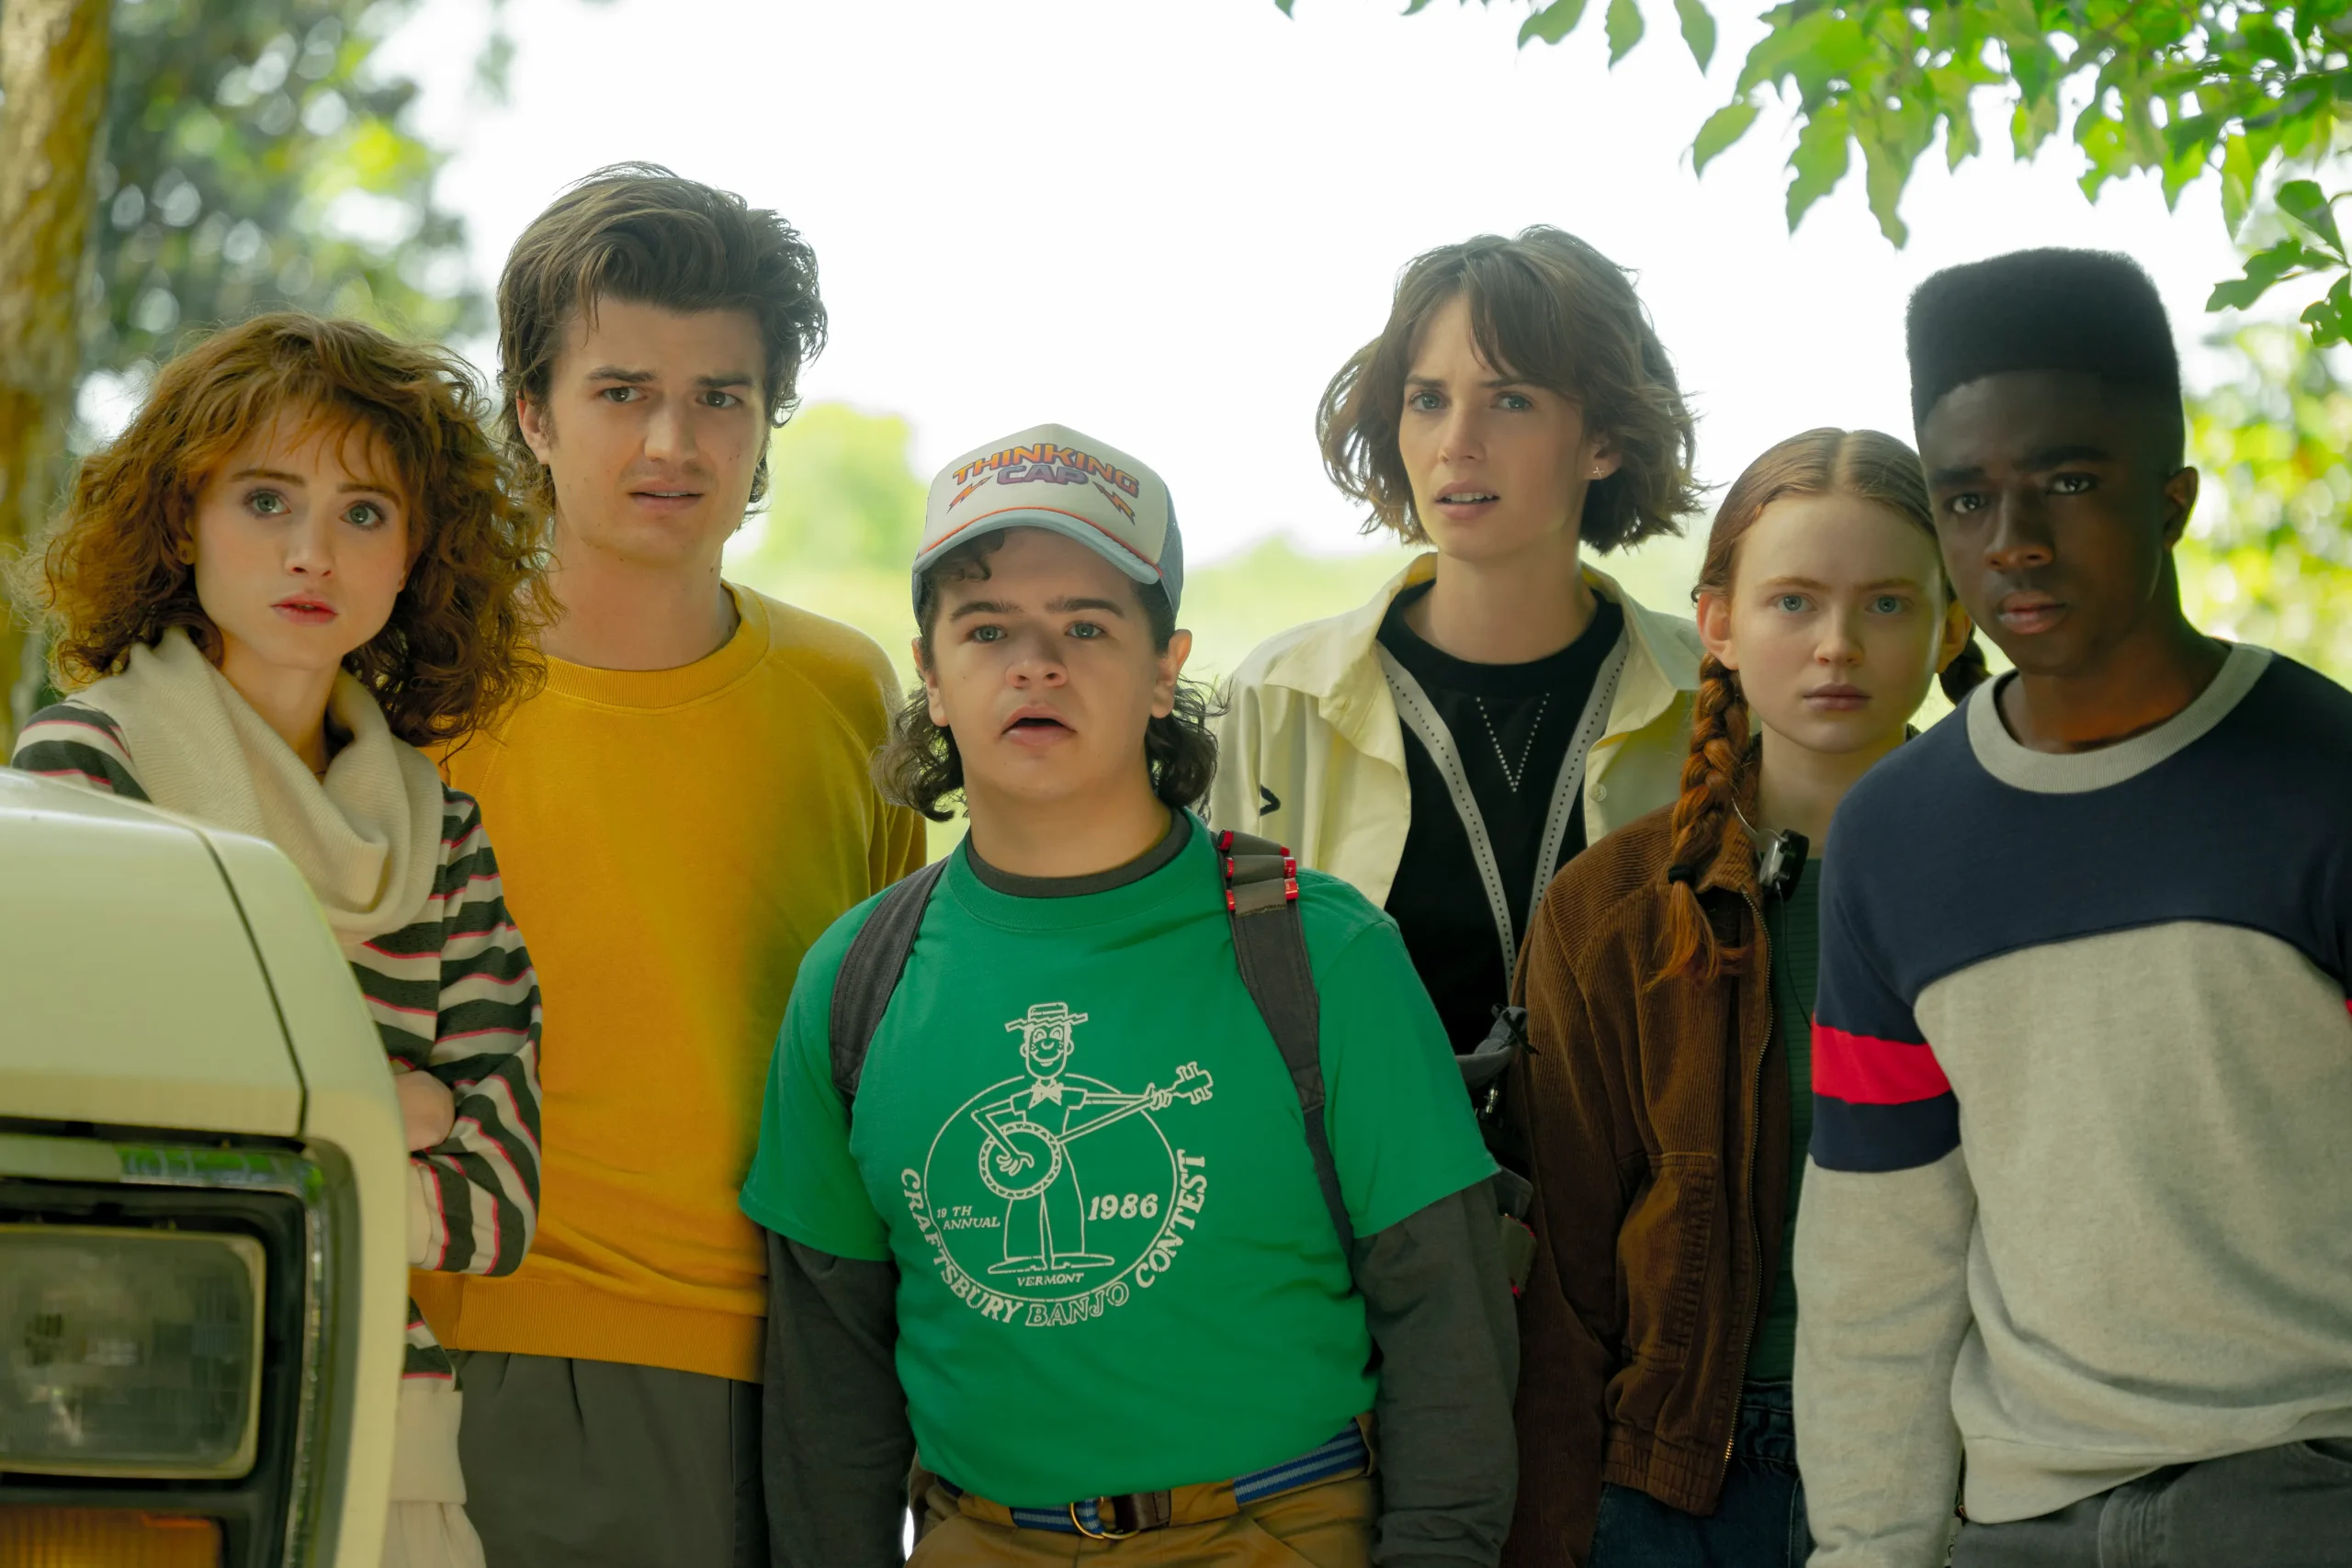 Stranger Things 5: Inside Scoop on the Epic Final Season and New Cast Additions